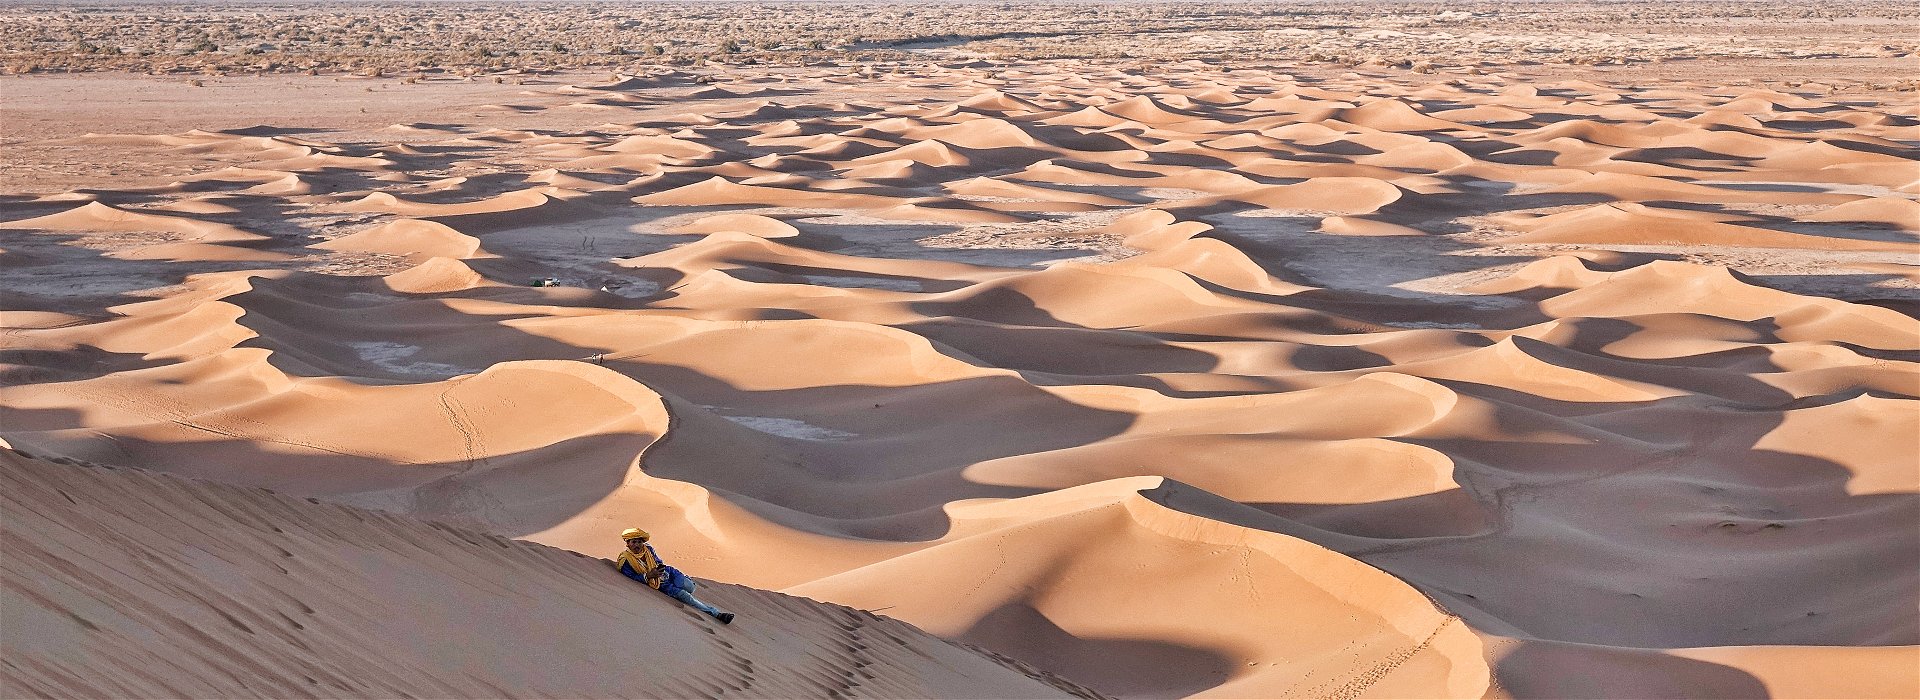 Six Places to Spot the World's Most Breathtaking Sand Dunes, Travel